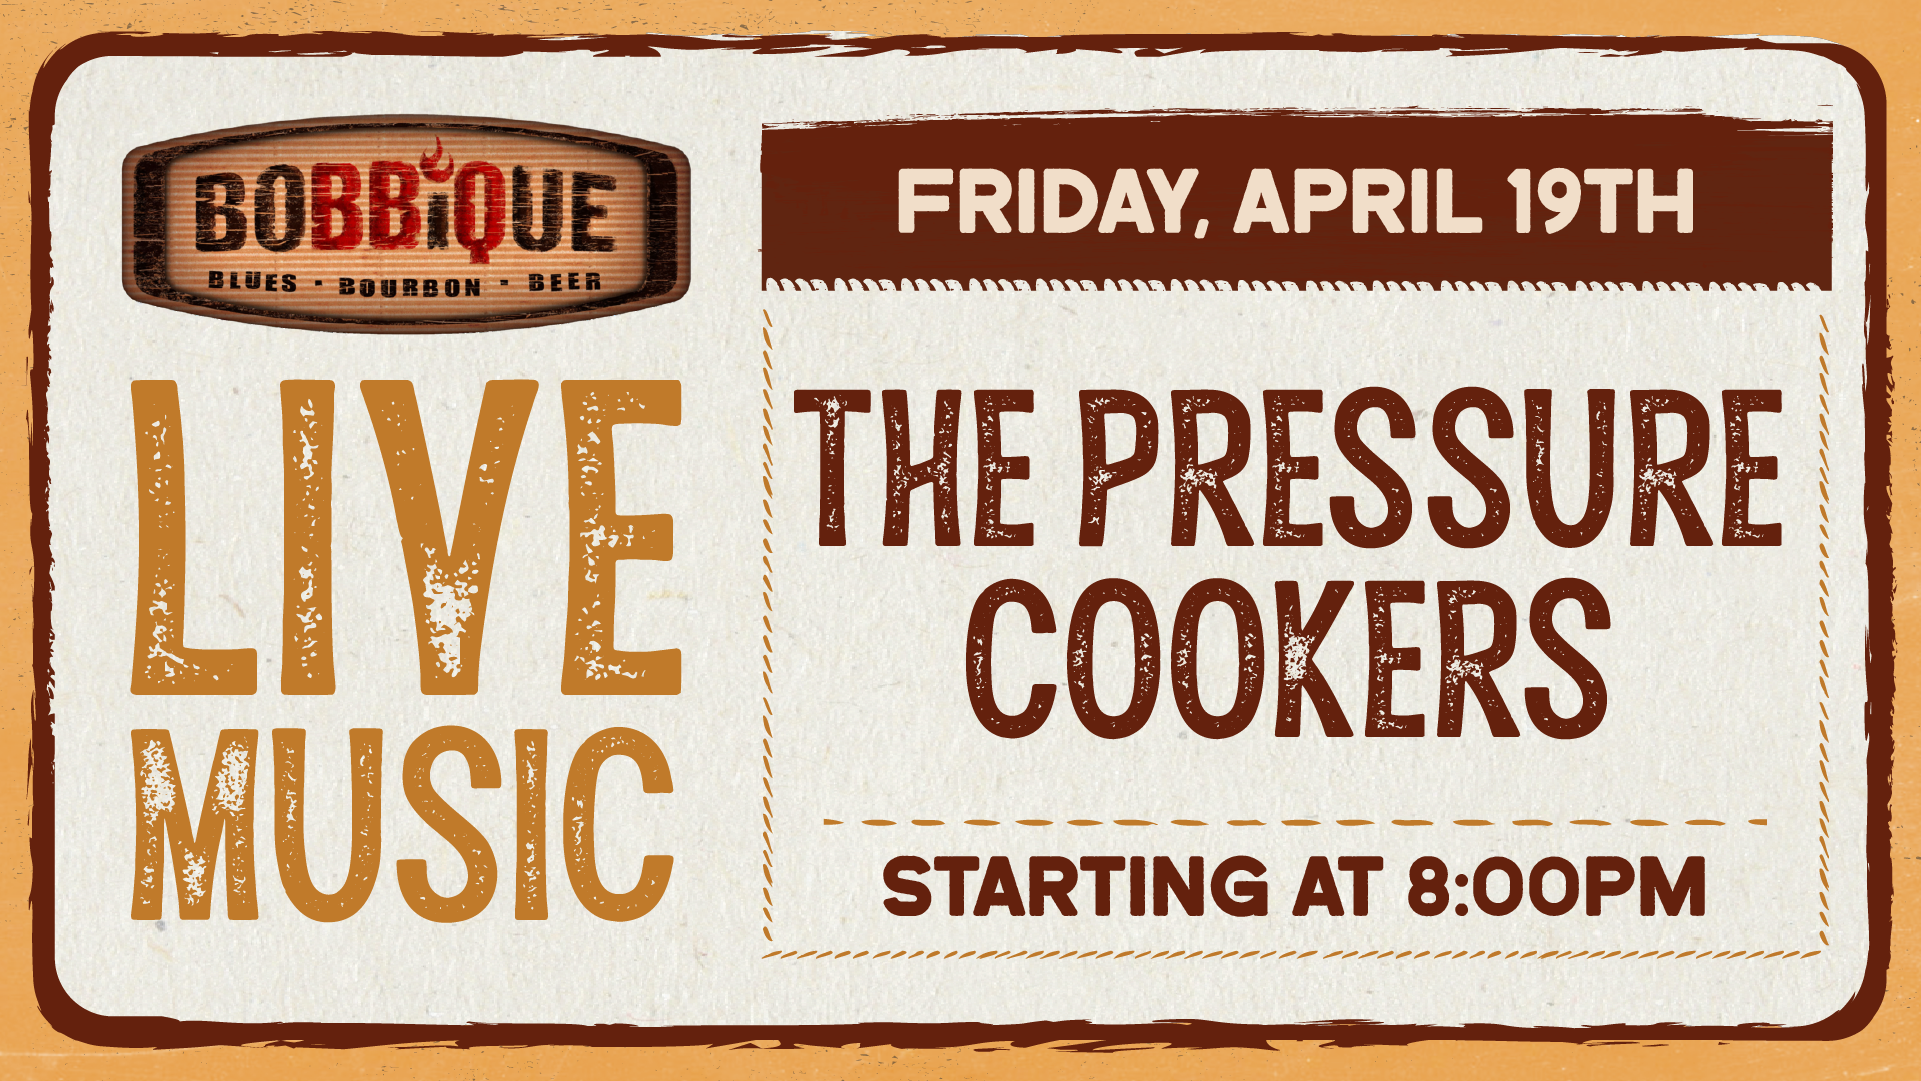 The Pressure Cookers take the Bobbique stage April 19th at 8pm!